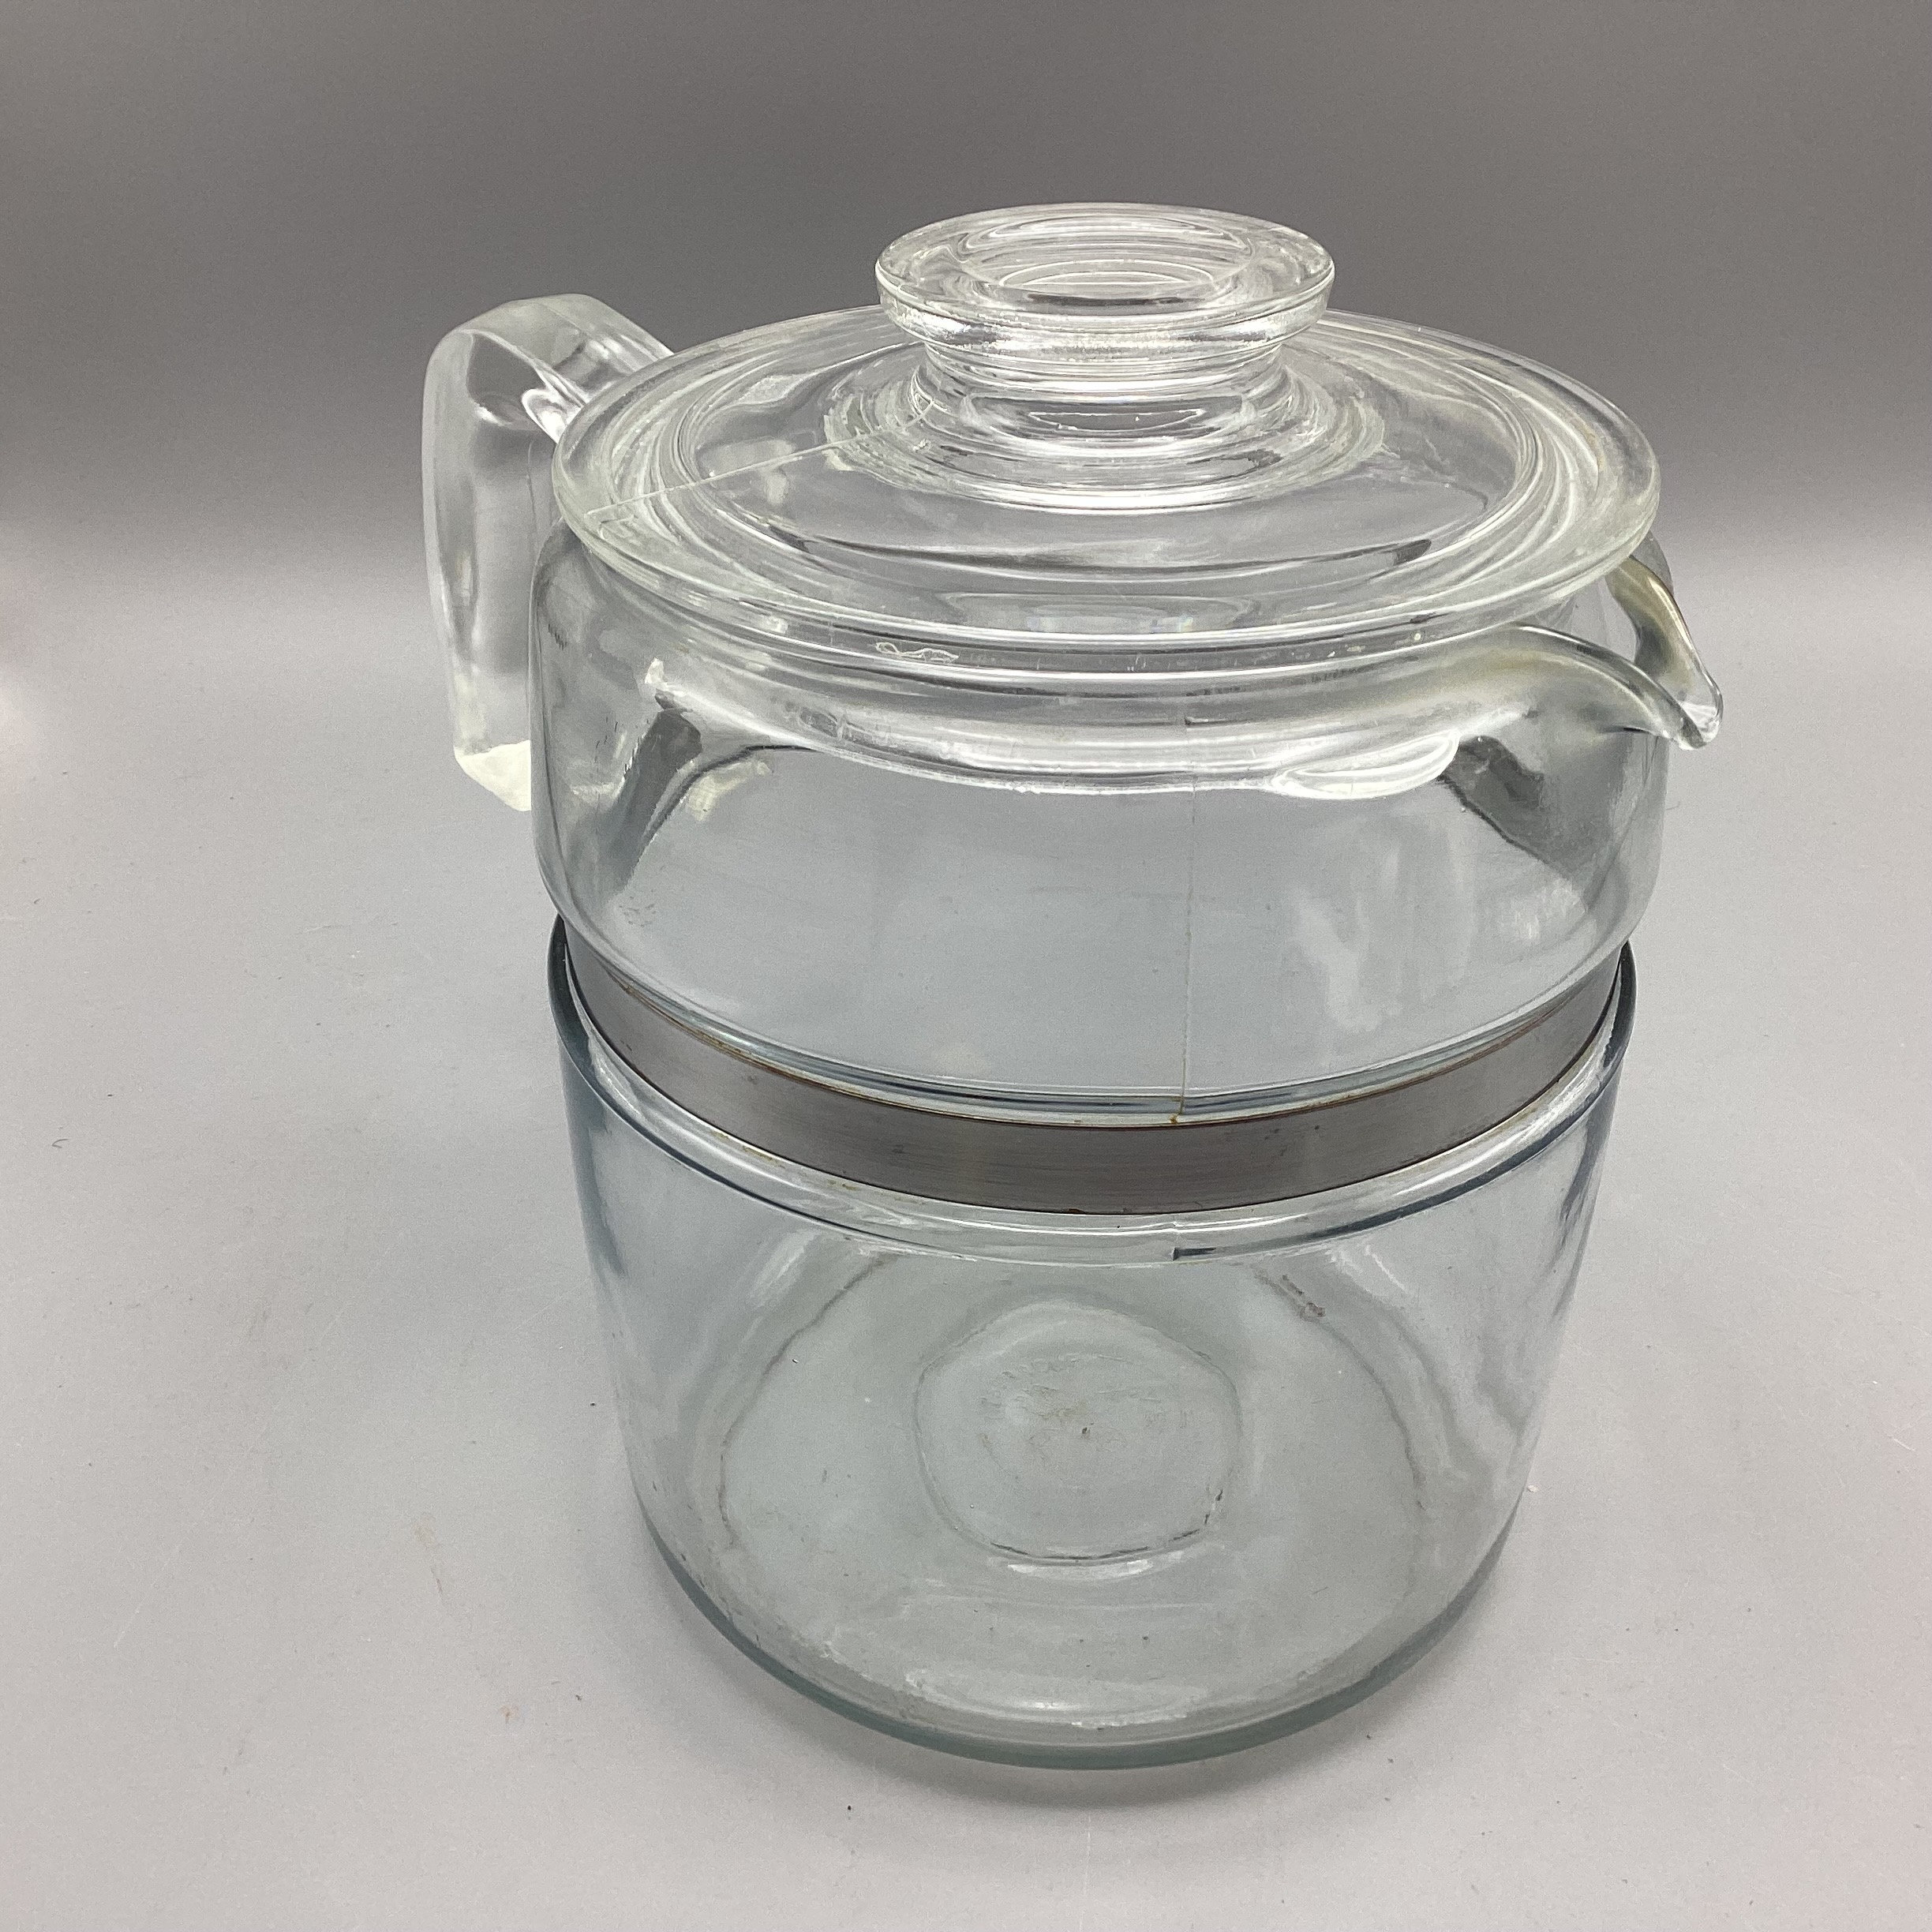 Flameware Stem Insert for 6 Cup Percolator by Pyrex